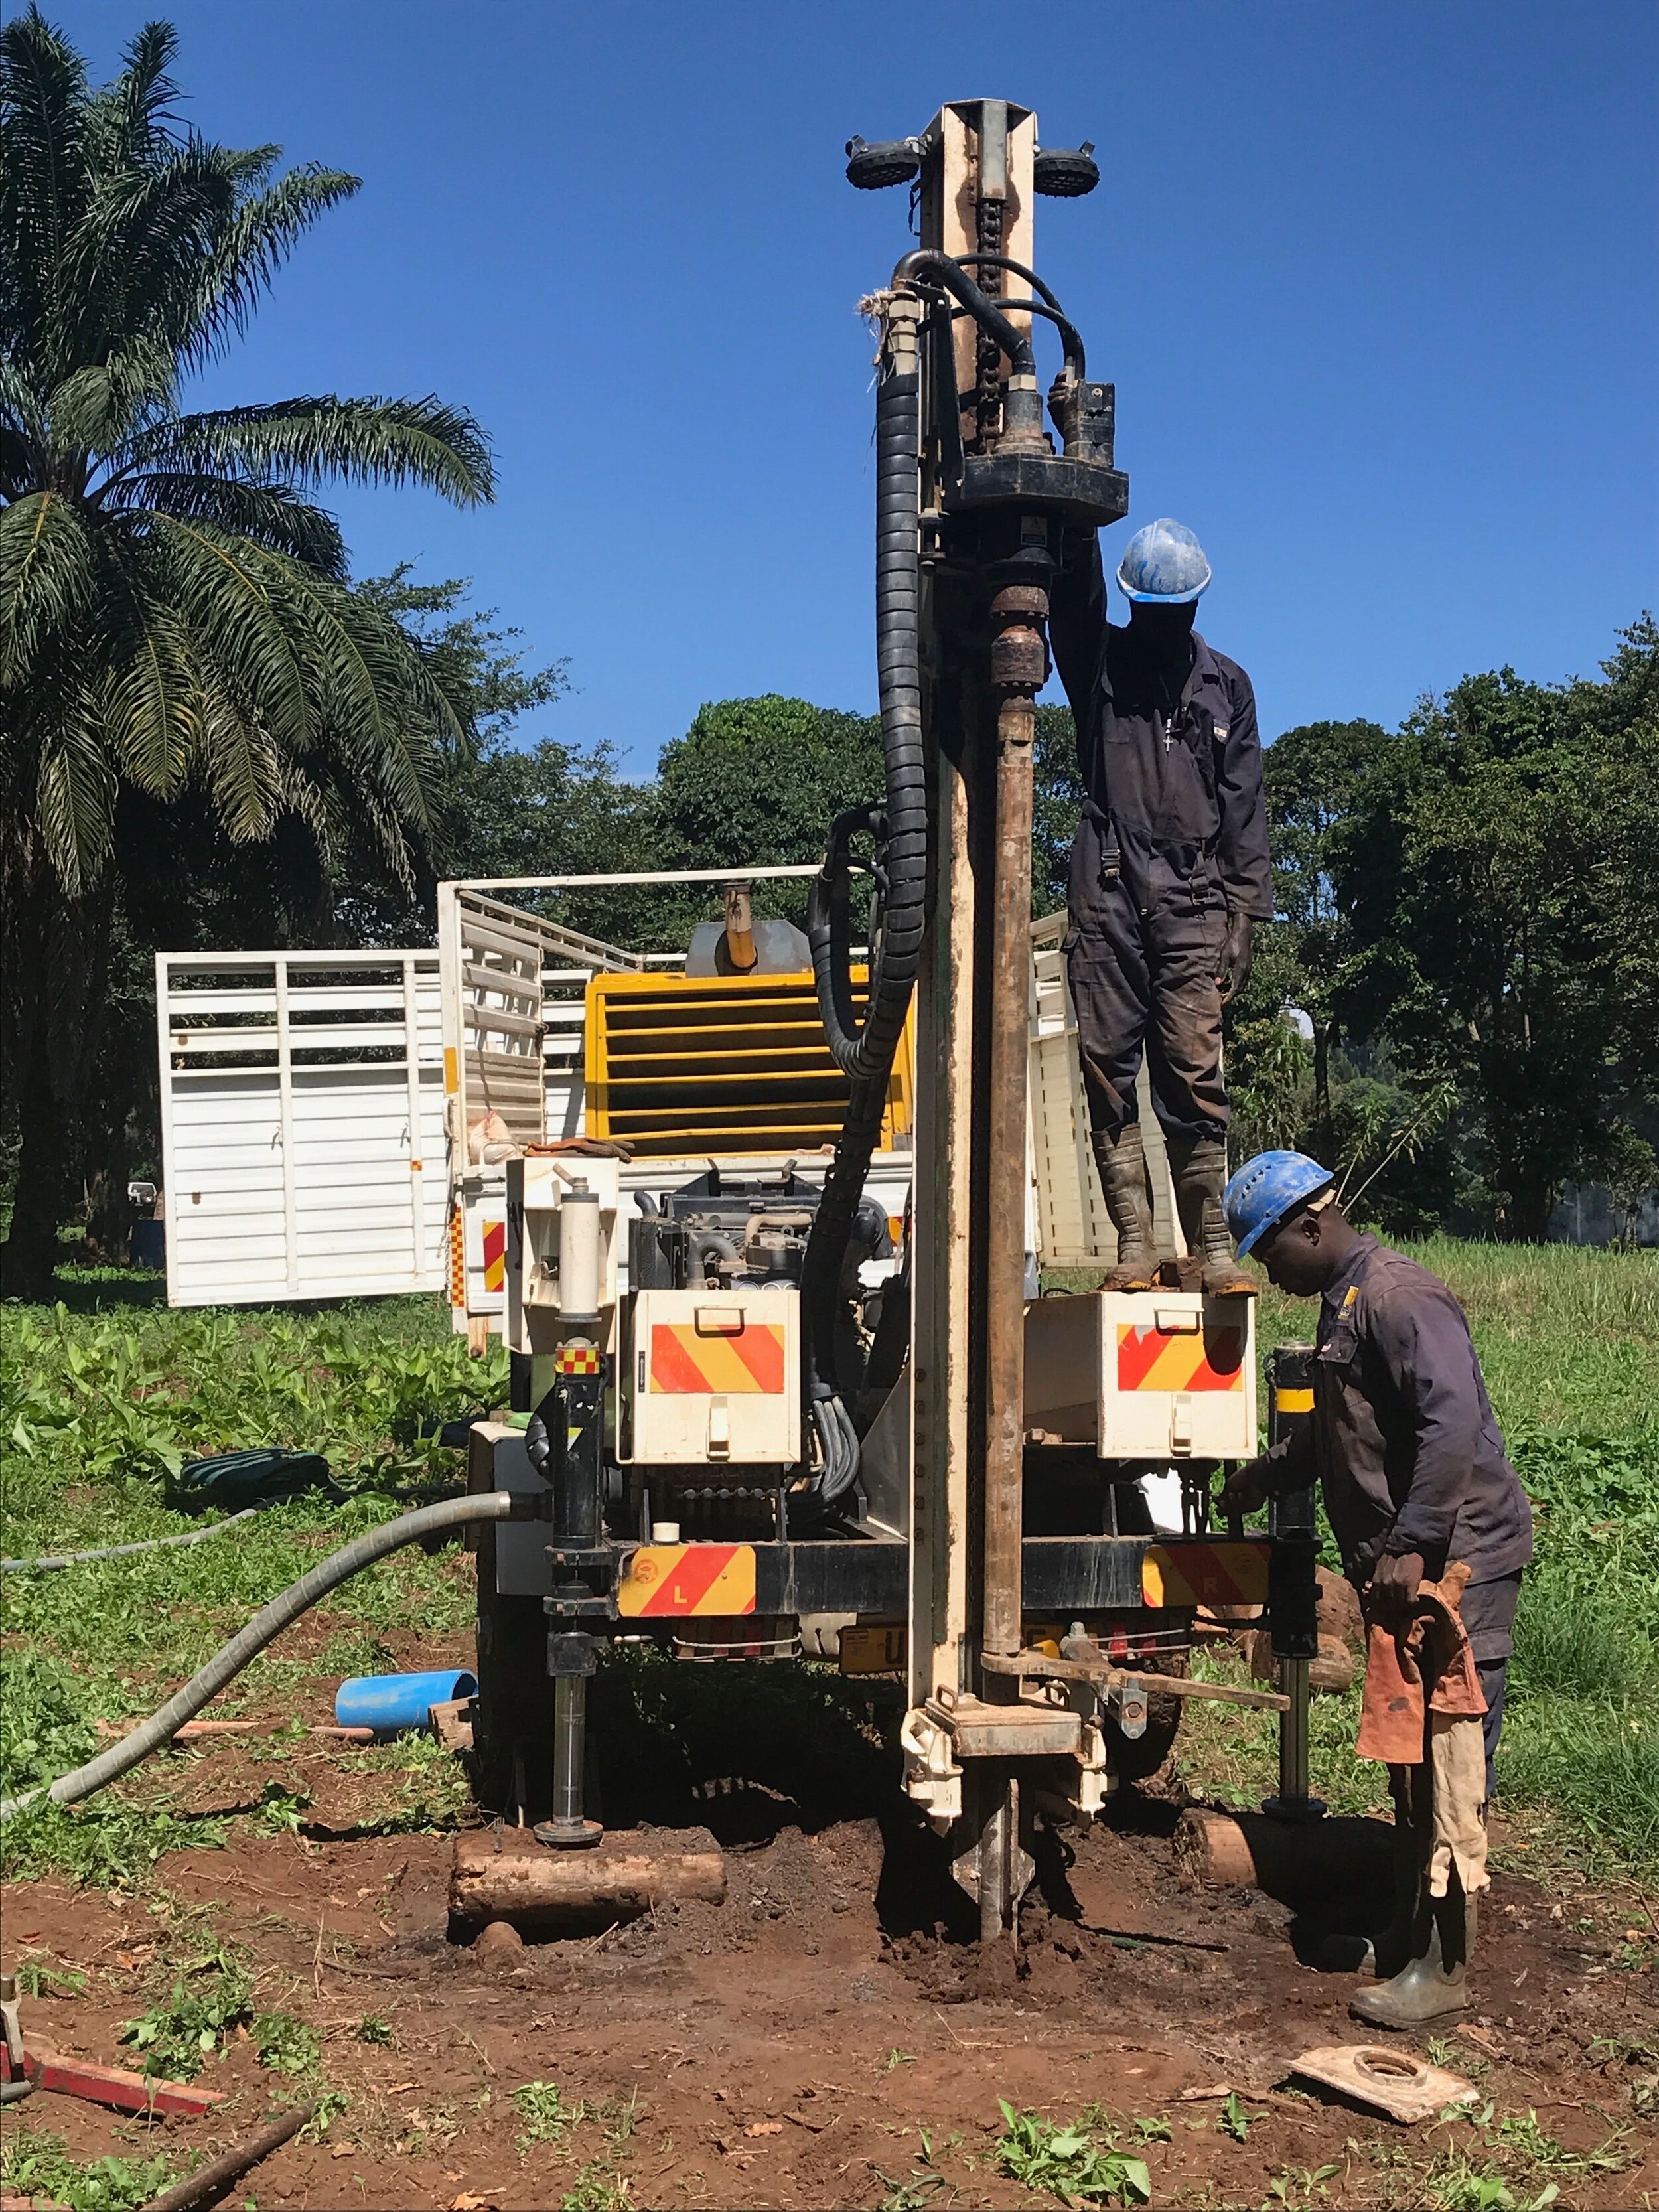  Partnership with Living Water International - drilling a well!  